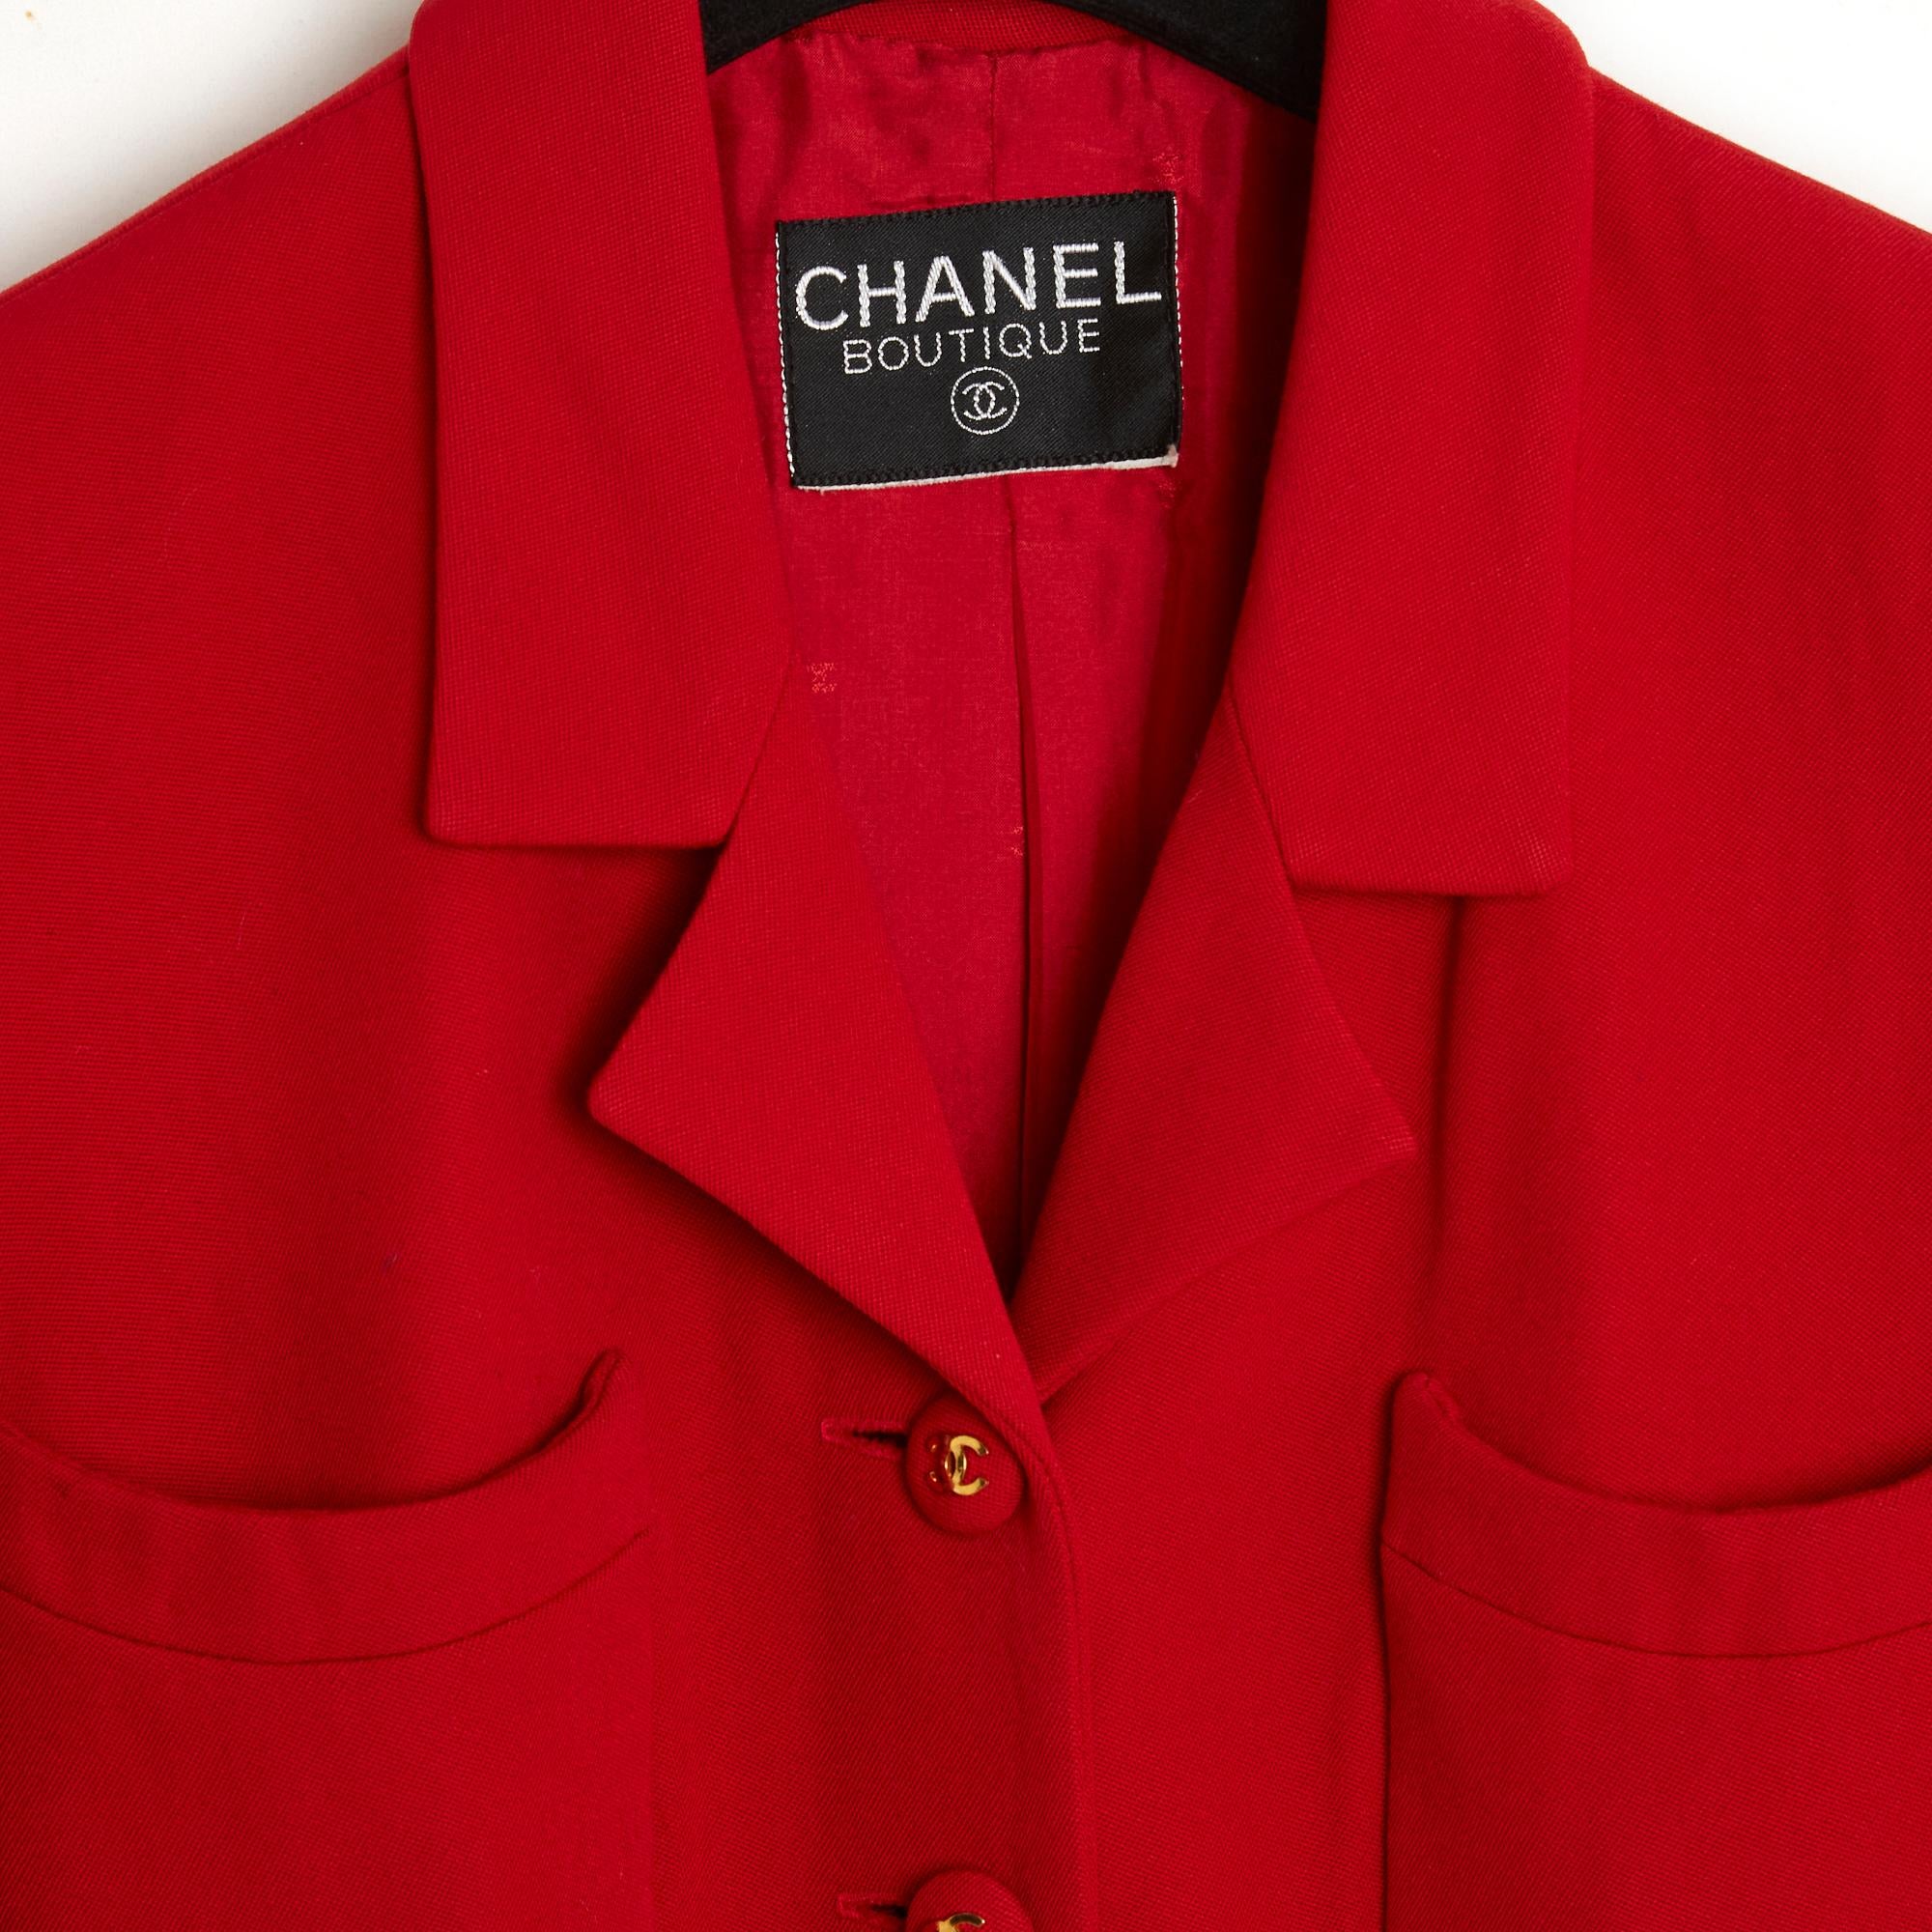 Women's or Men's 1992FW Chanel Red Wool Crepe Dress Iconic Coat FR34/36